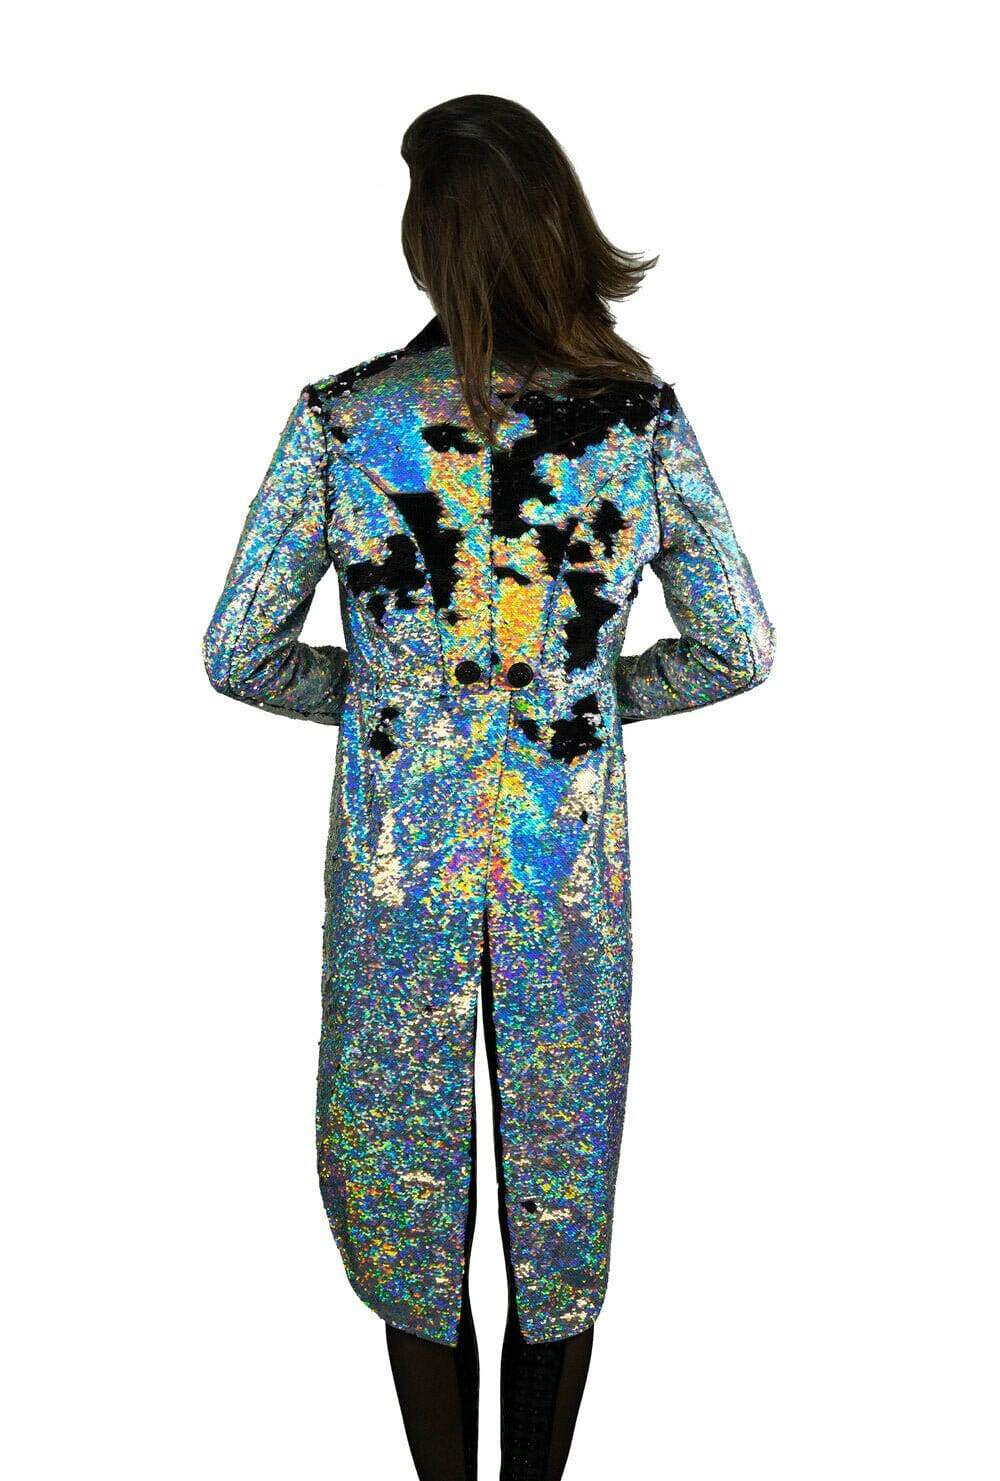 womens sequin tailcoat by Love Khaos Festival Clothing